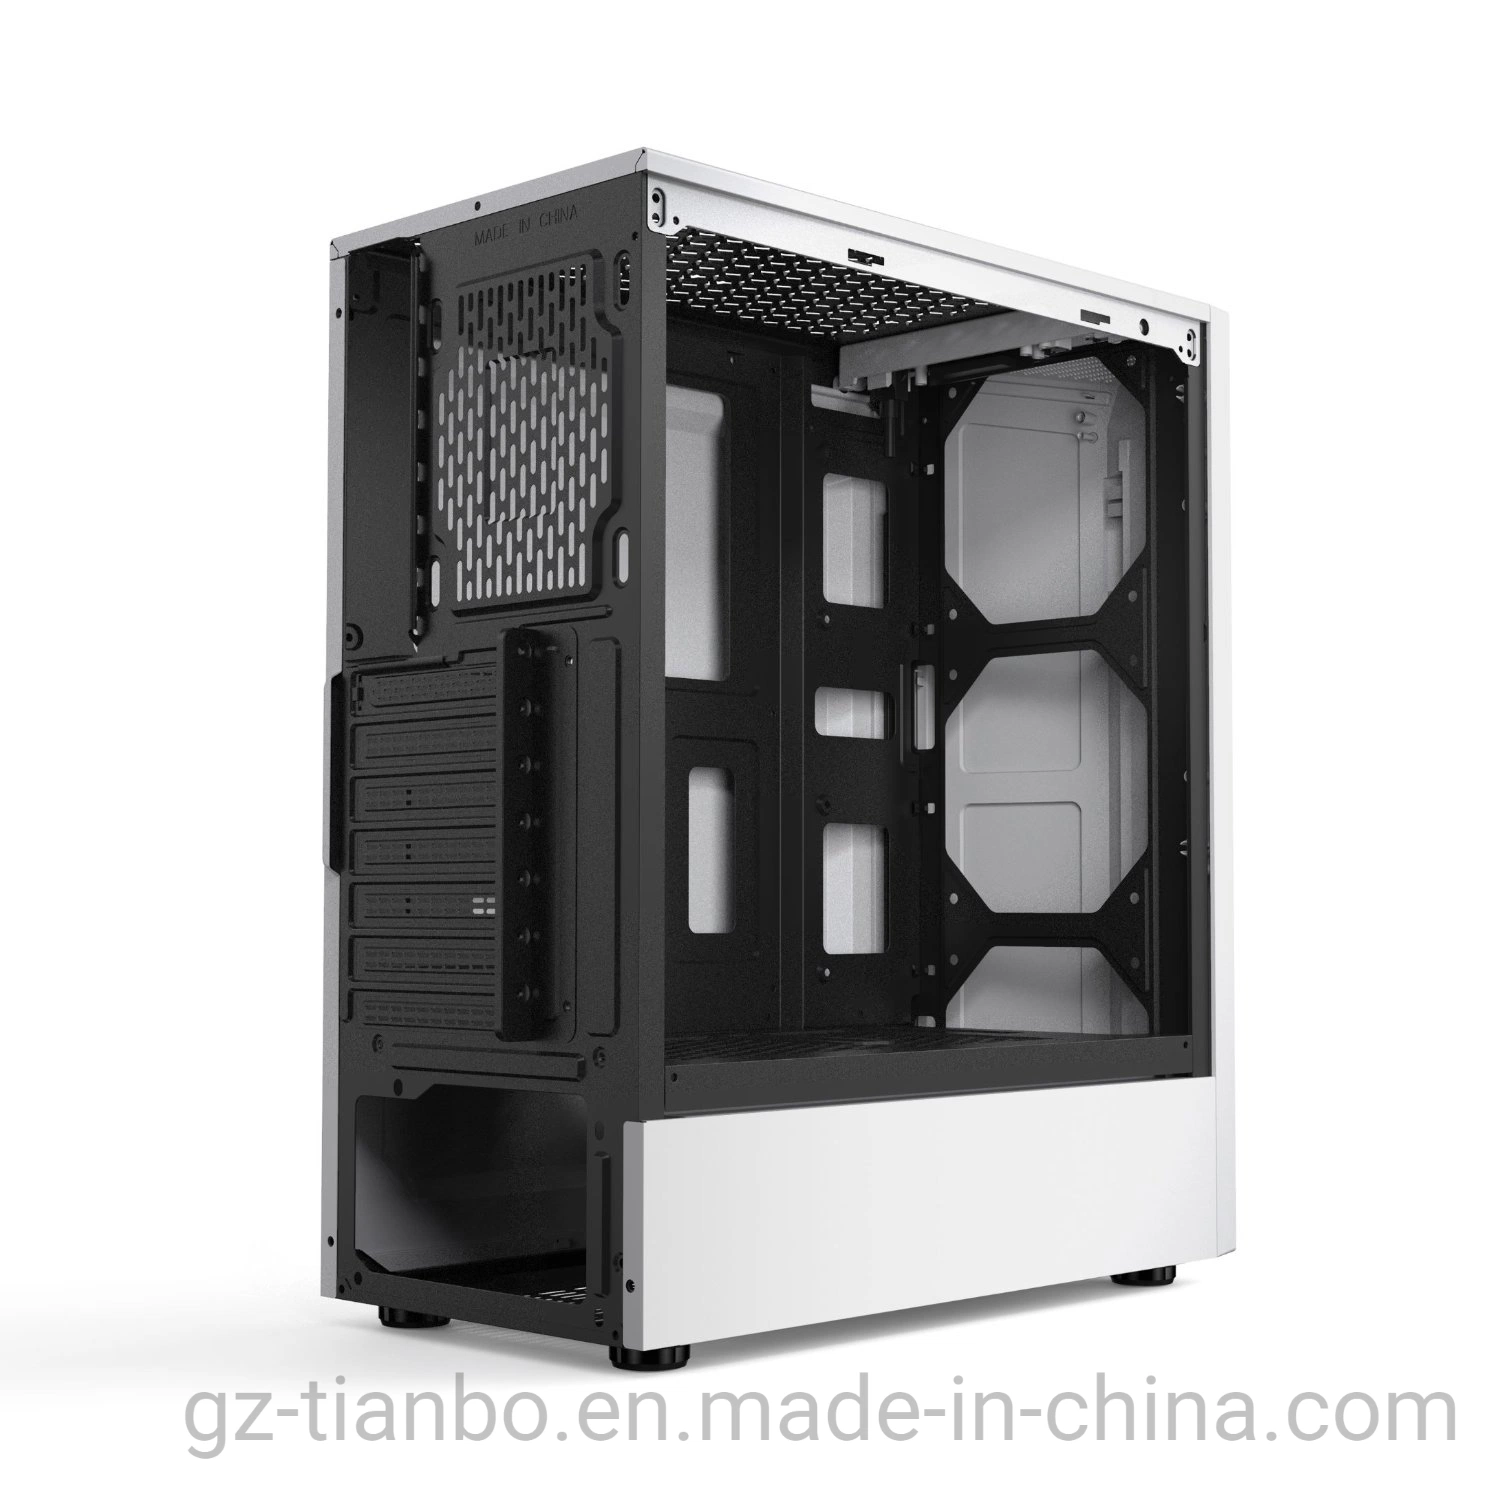 China Best Selling Hot Model RGB Fan ATX Desktop Computer Case for Gaming